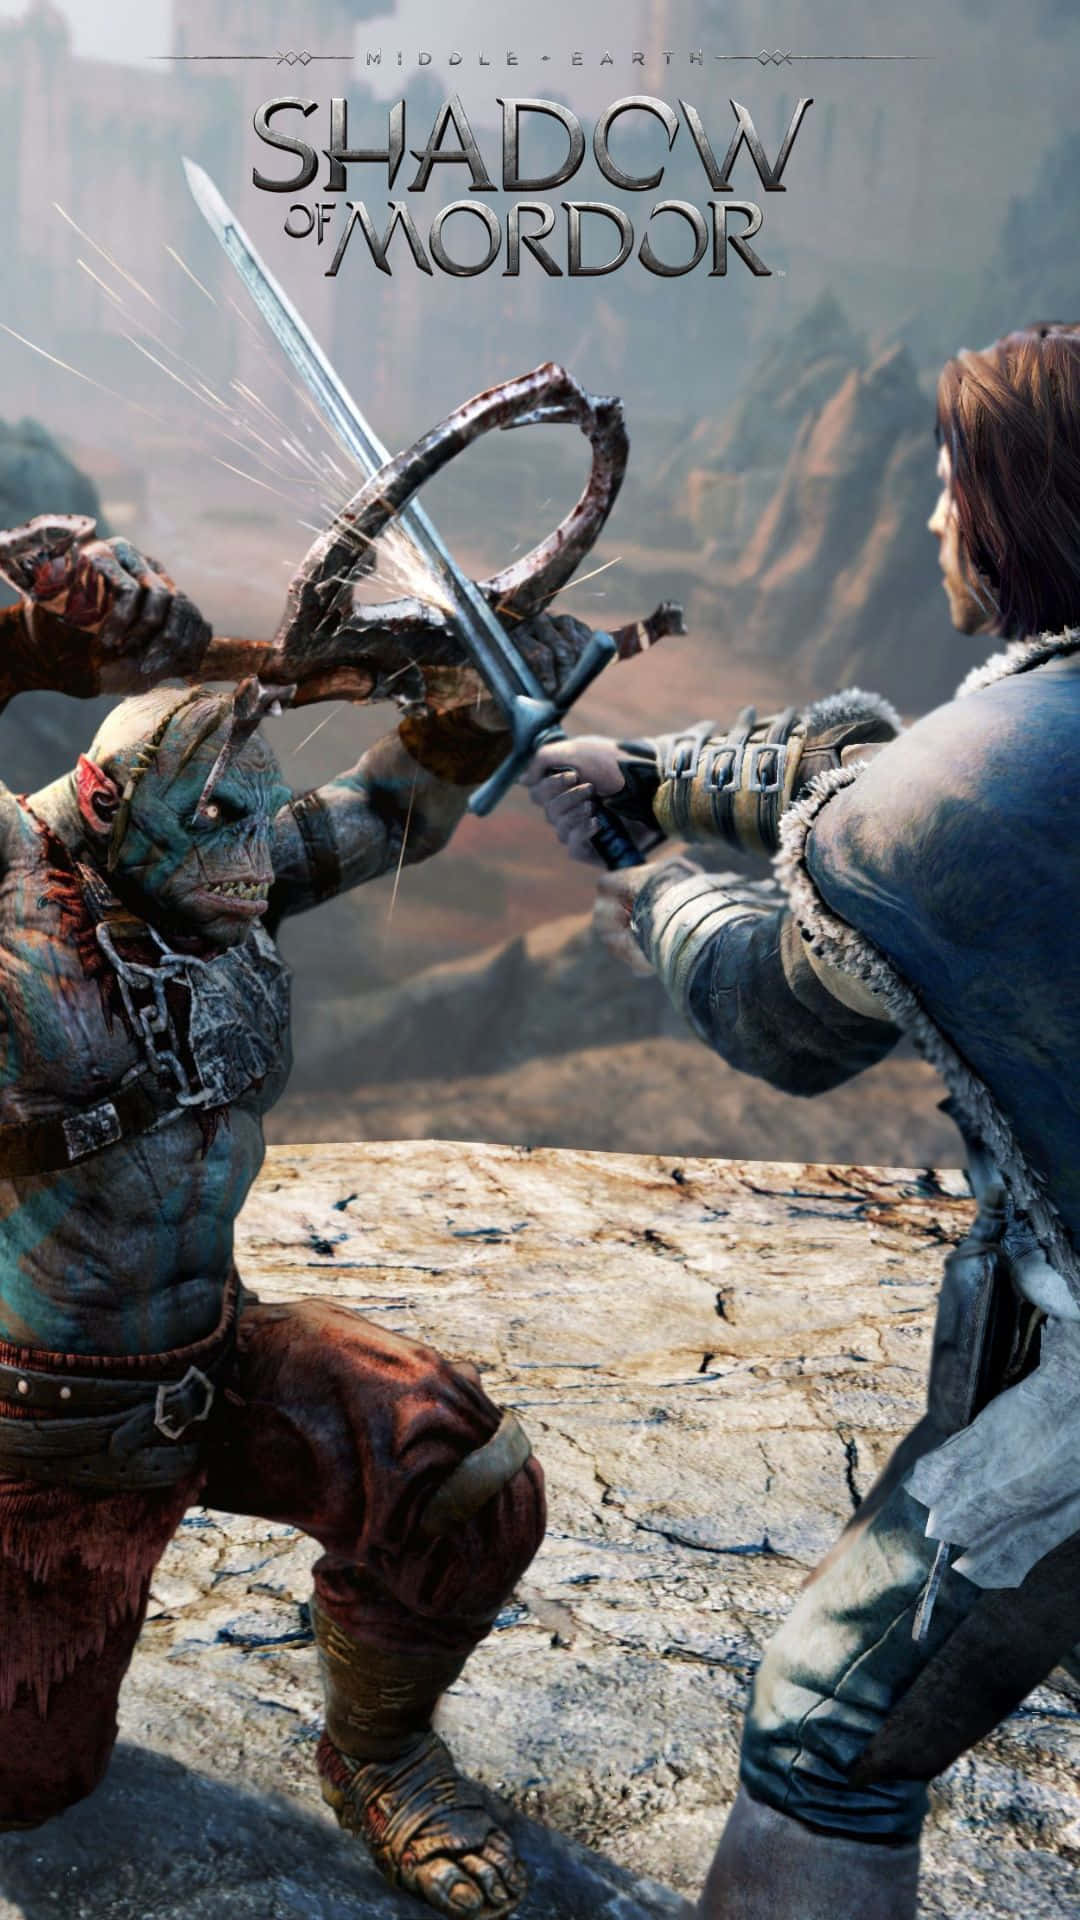 Fight Mordor and save Middle-earth in Android Shadow of Mordor